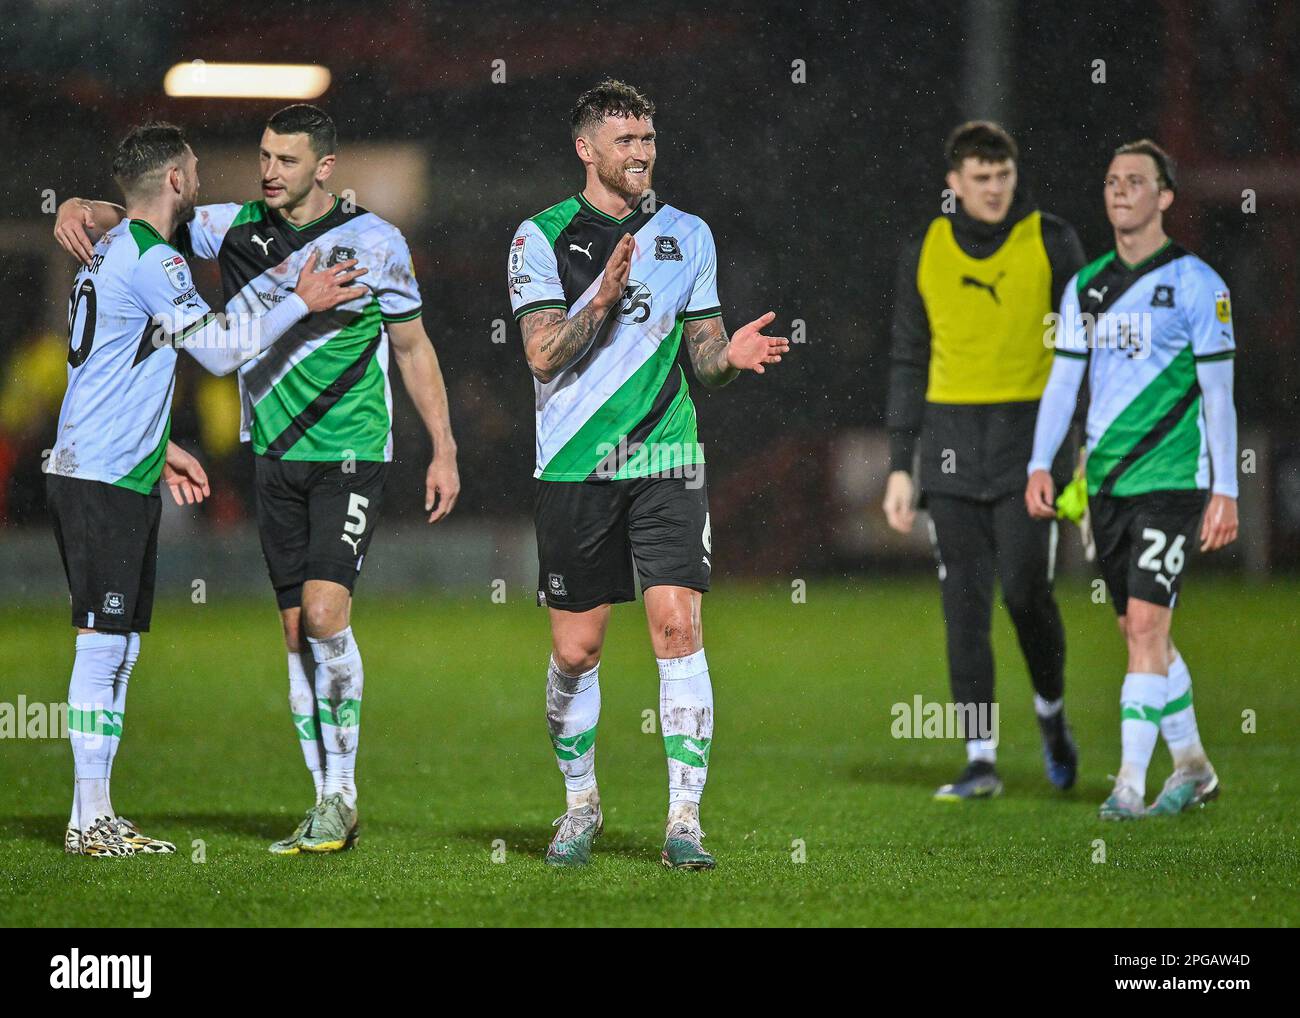 Dan Scarr #6 of Plymouth Argyle celebrates a win at full time during the Sky Bet League 1 match Accrington Stanley vs Plymouth Argyle at Wham Stadium, Accrington, United Kingdom, 21st March 2023  (Photo by Stan Kasala/News Images) Stock Photo